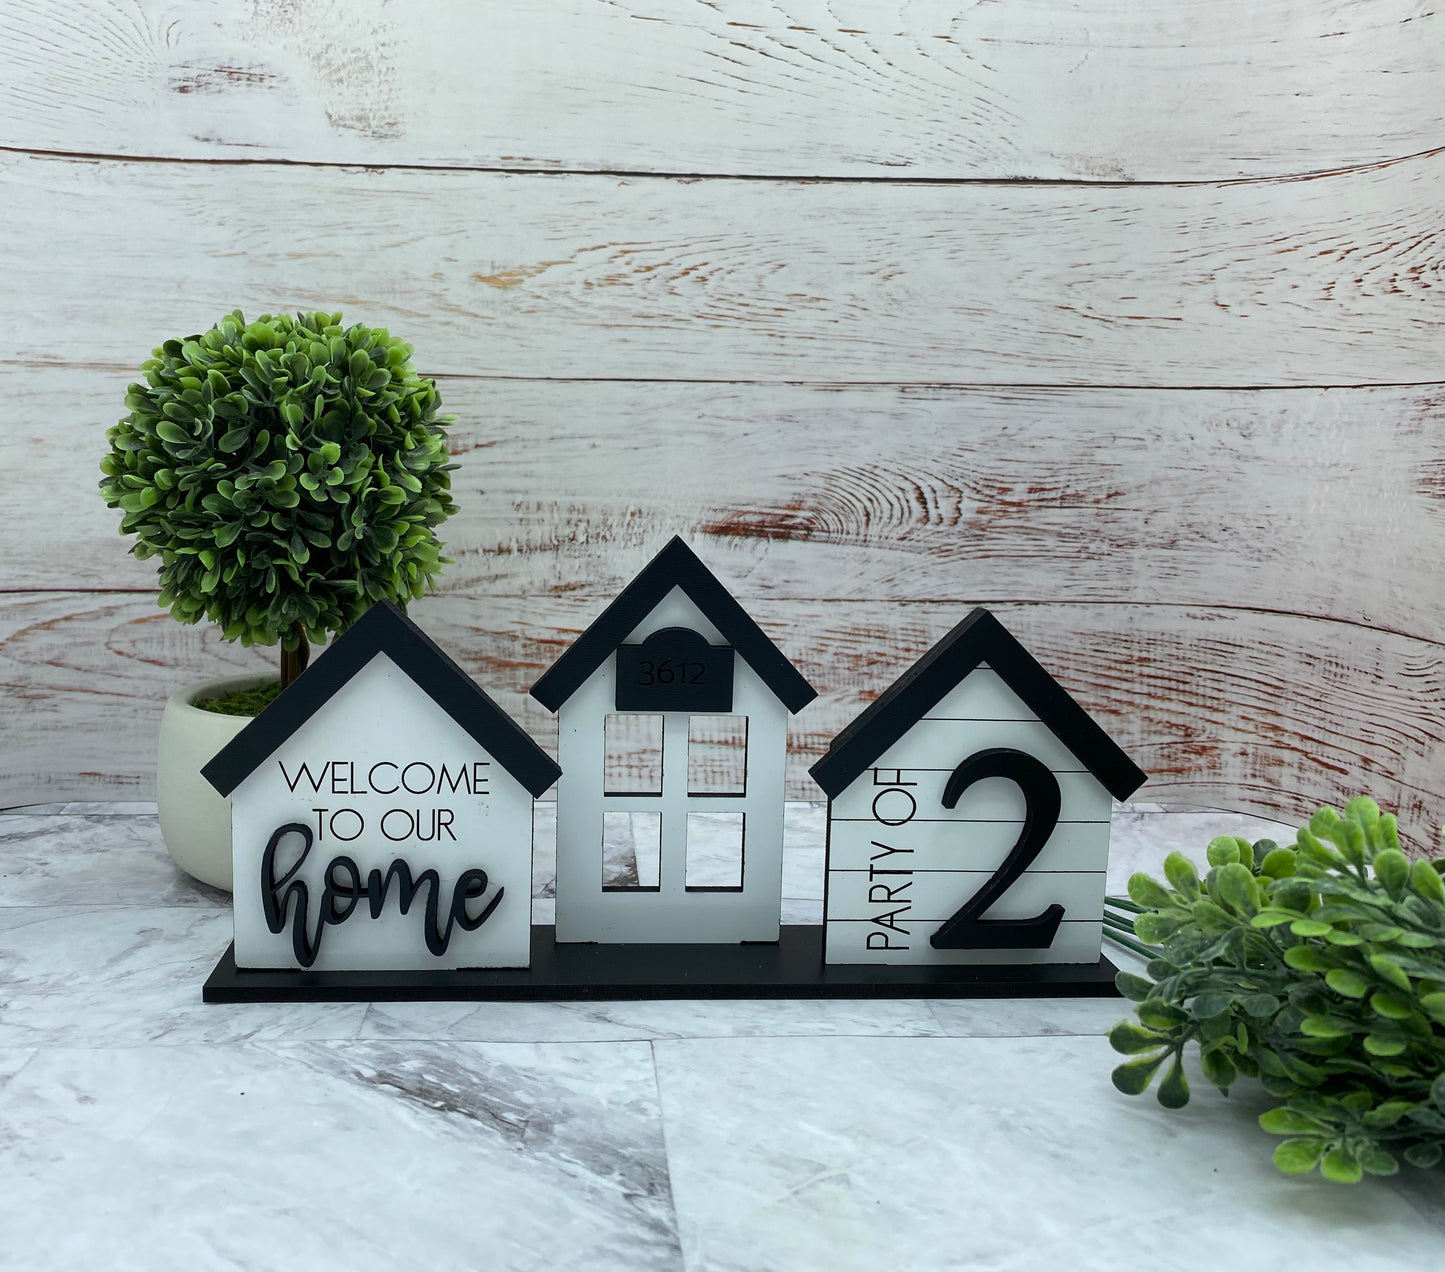 Set of 3 Customized Decorative Tabletop Houses (Welcome Home, House Number and Party of (#)) - Home Decor